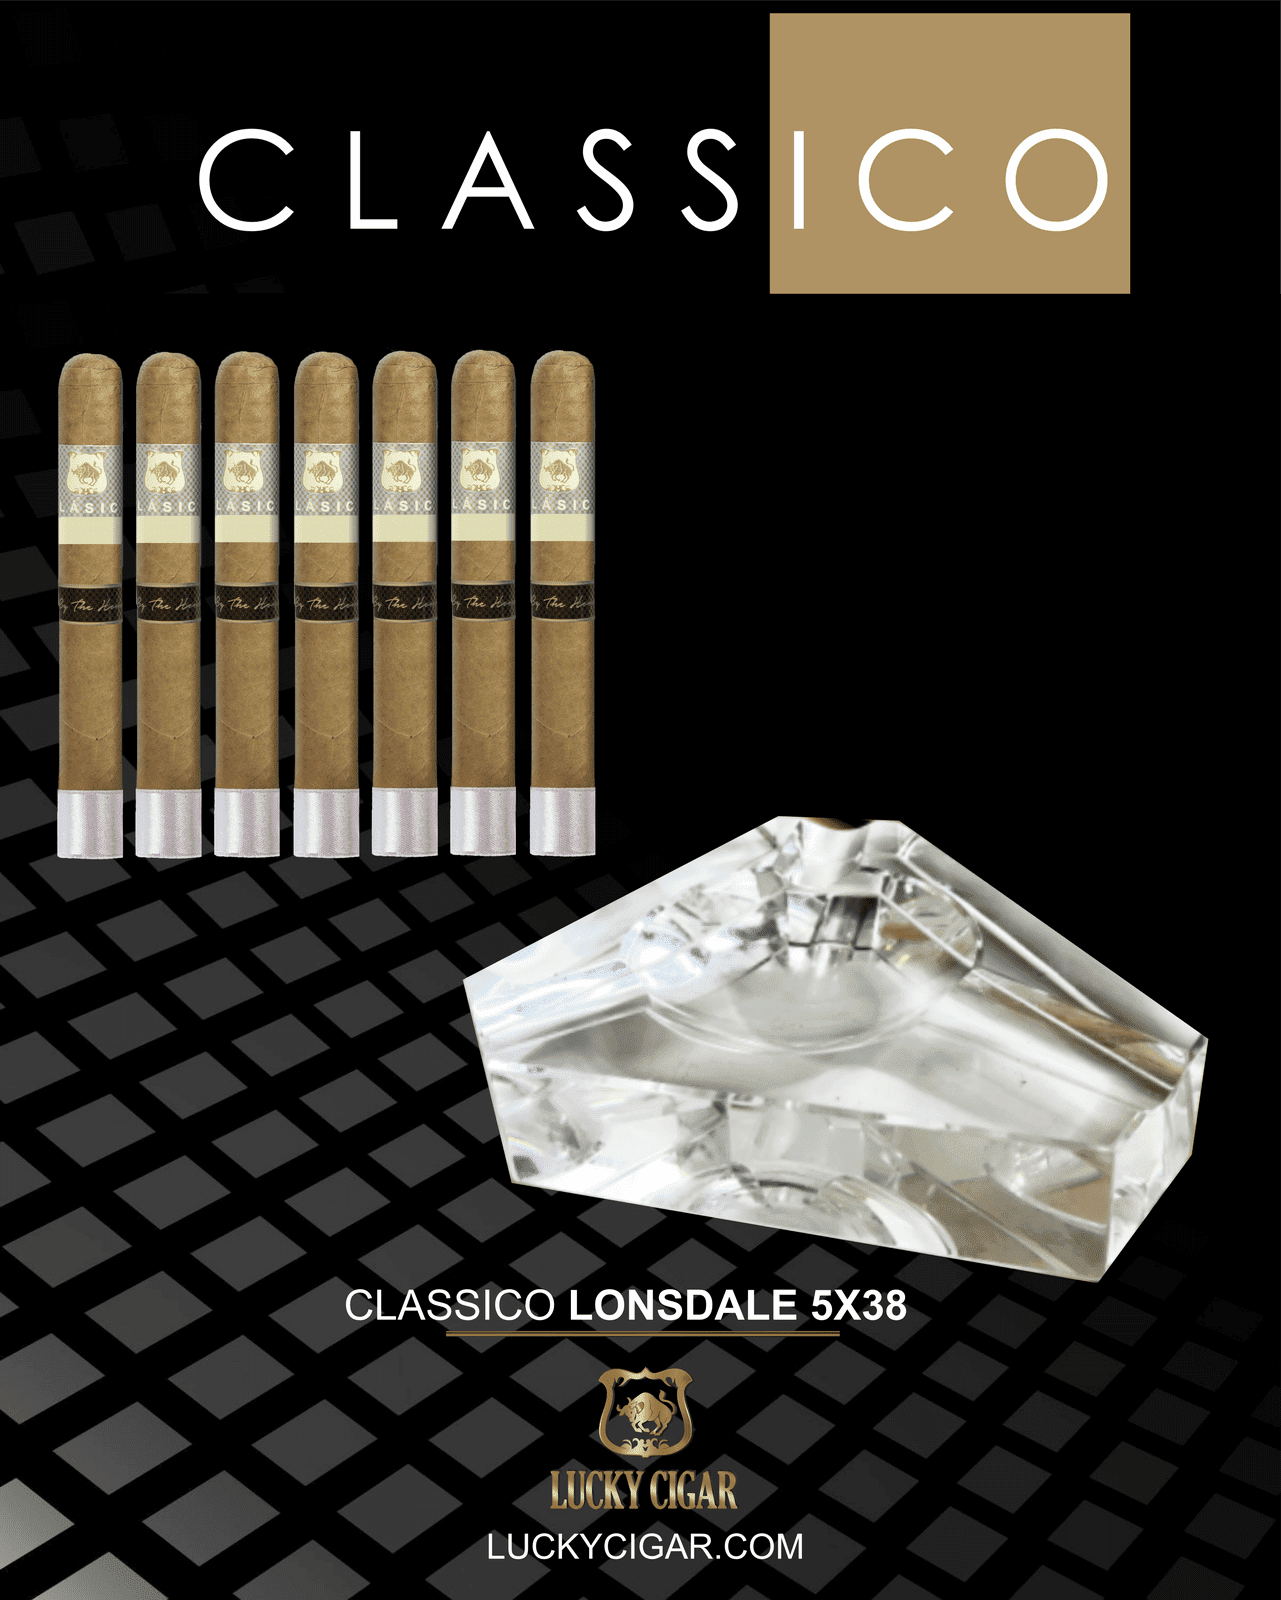 Classic Cigars - Classico by Lucky Cigar: Set of 7 Cigars, 7 Lonsdale with Ashtray